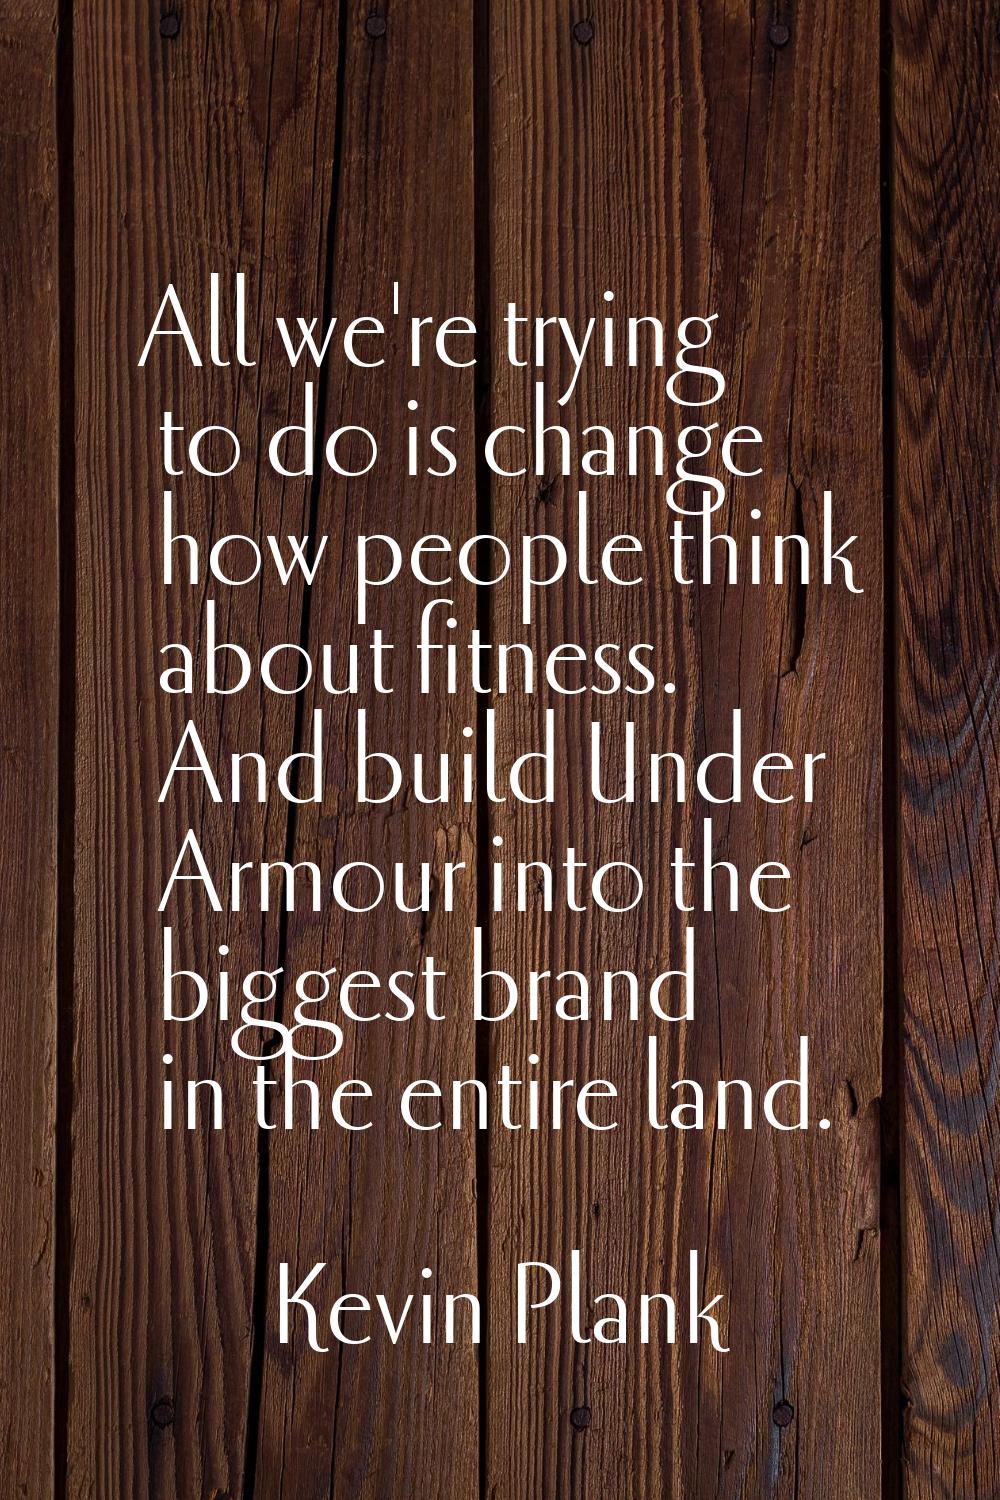 All we're trying to do is change how people think about fitness. And build Under Armour into the bi